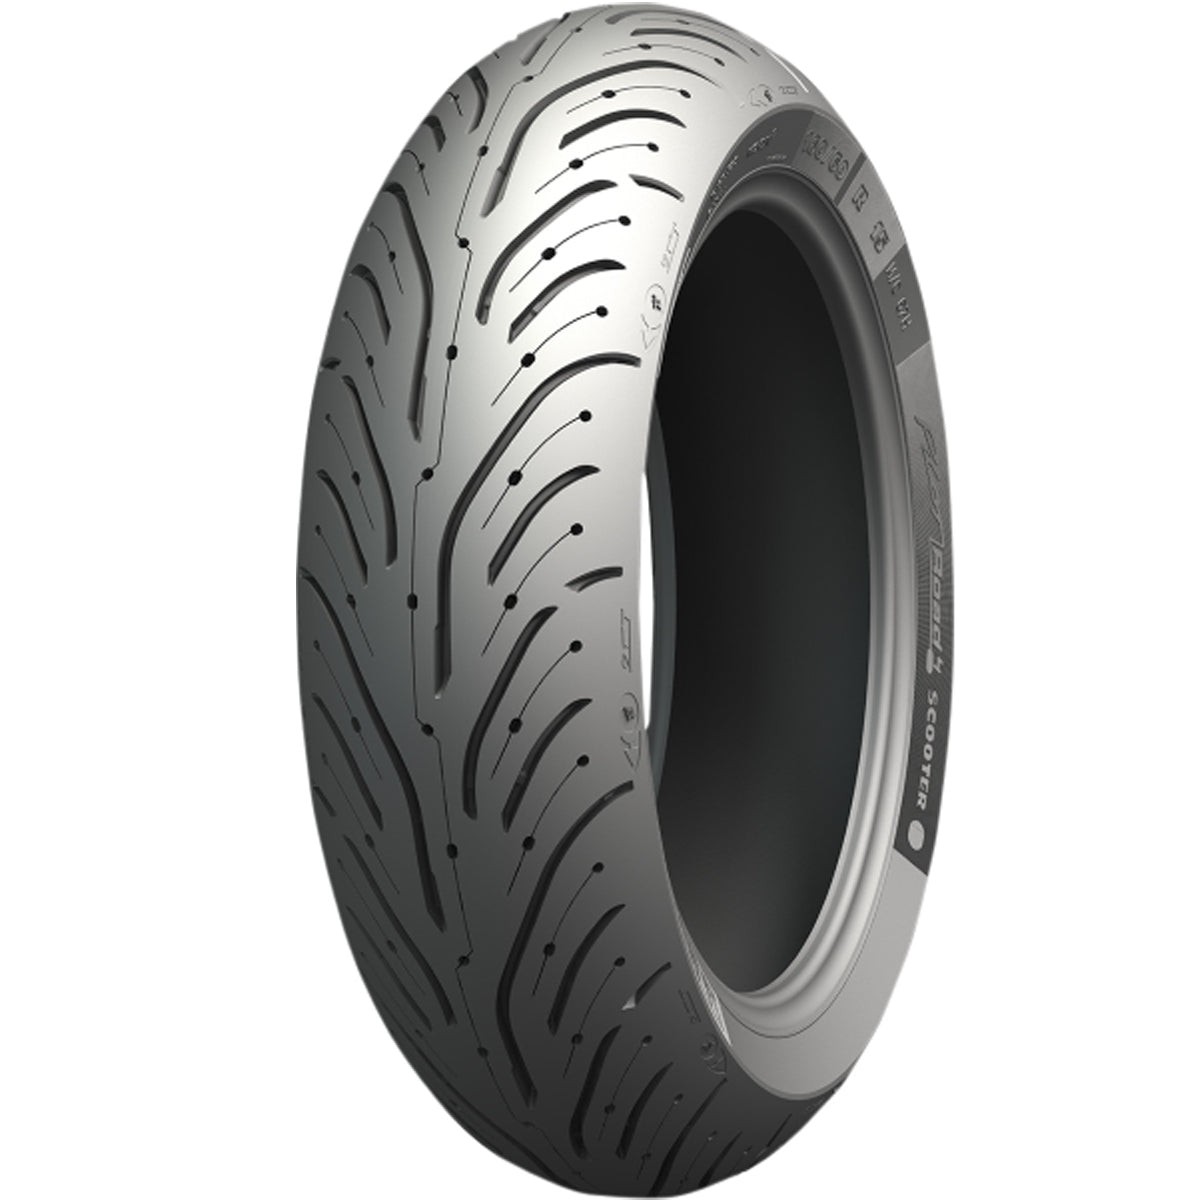 Michelin Pilot Road 4 Scooter 15" Rear Cruiser Tires-0340